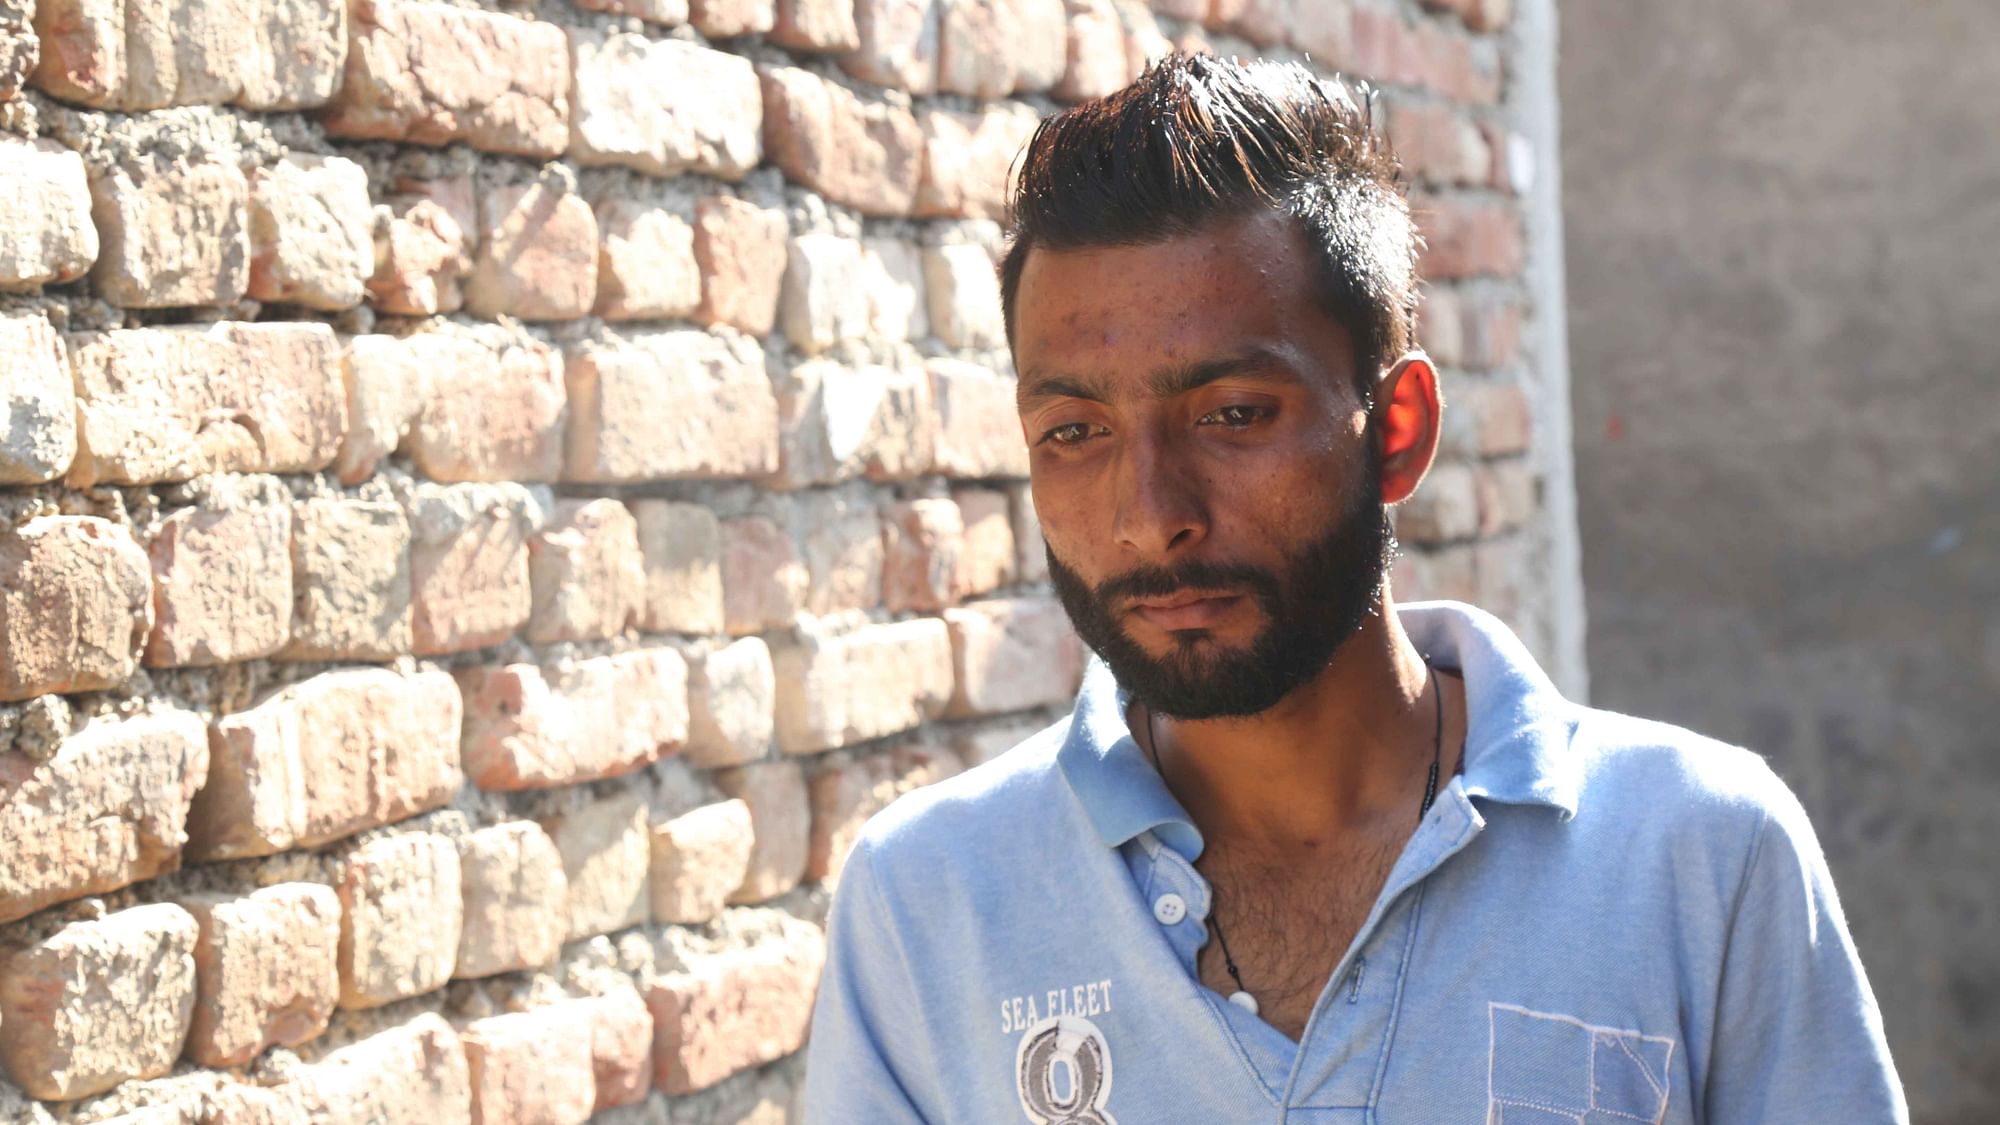 Harjit Masih is the only one of 40 Indians kidnapped by the ISIS in June, 2014 to have returned to India. (Photo: Siddharth Safaya/<b>The Quint</b>)